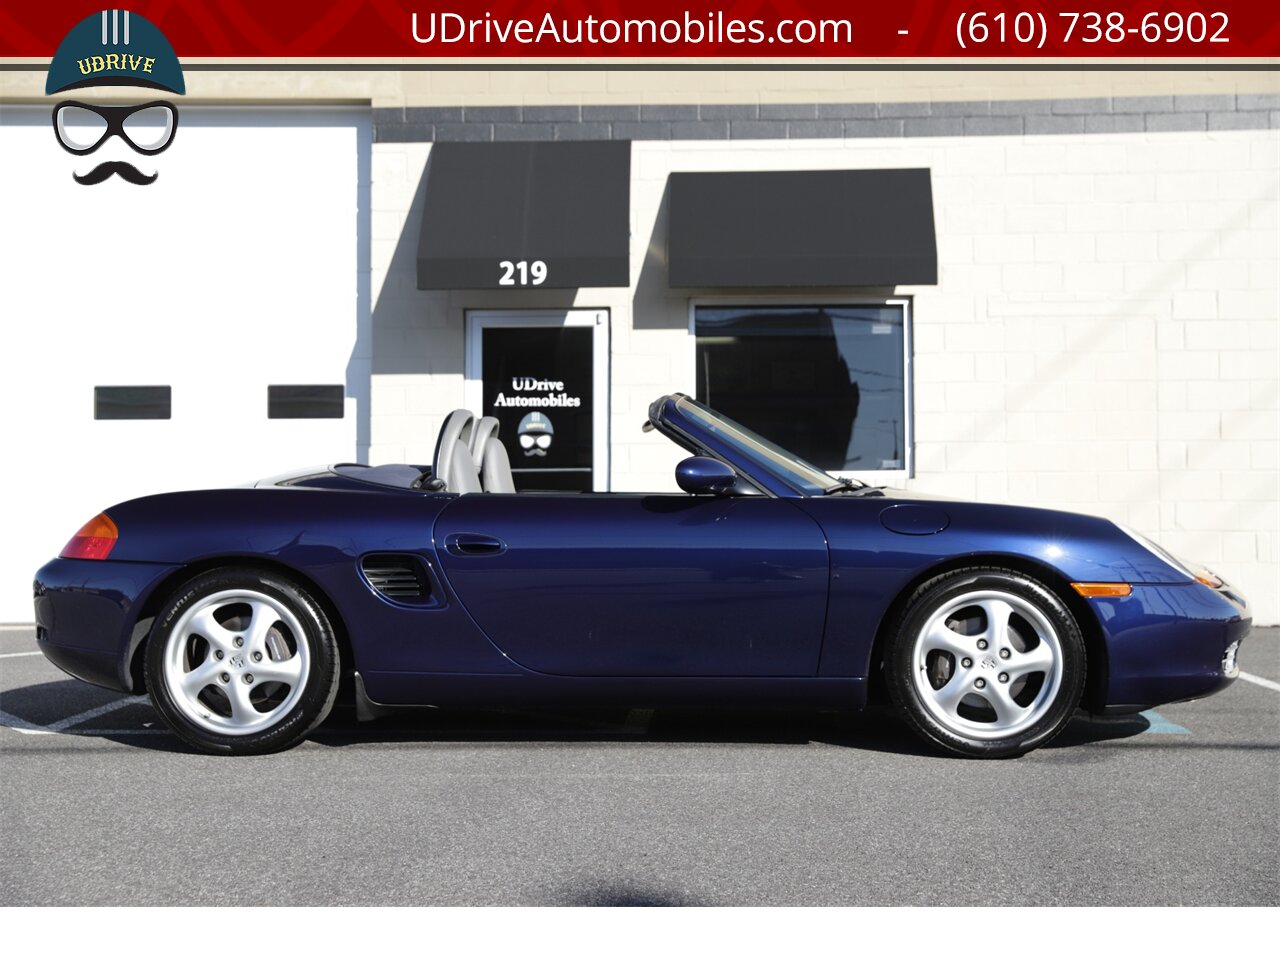 2001 Porsche Boxster 5 Speed Manual Detailed Service History  Same Owner for Last 18 Years Hard Top Included - Photo 13 - West Chester, PA 19382